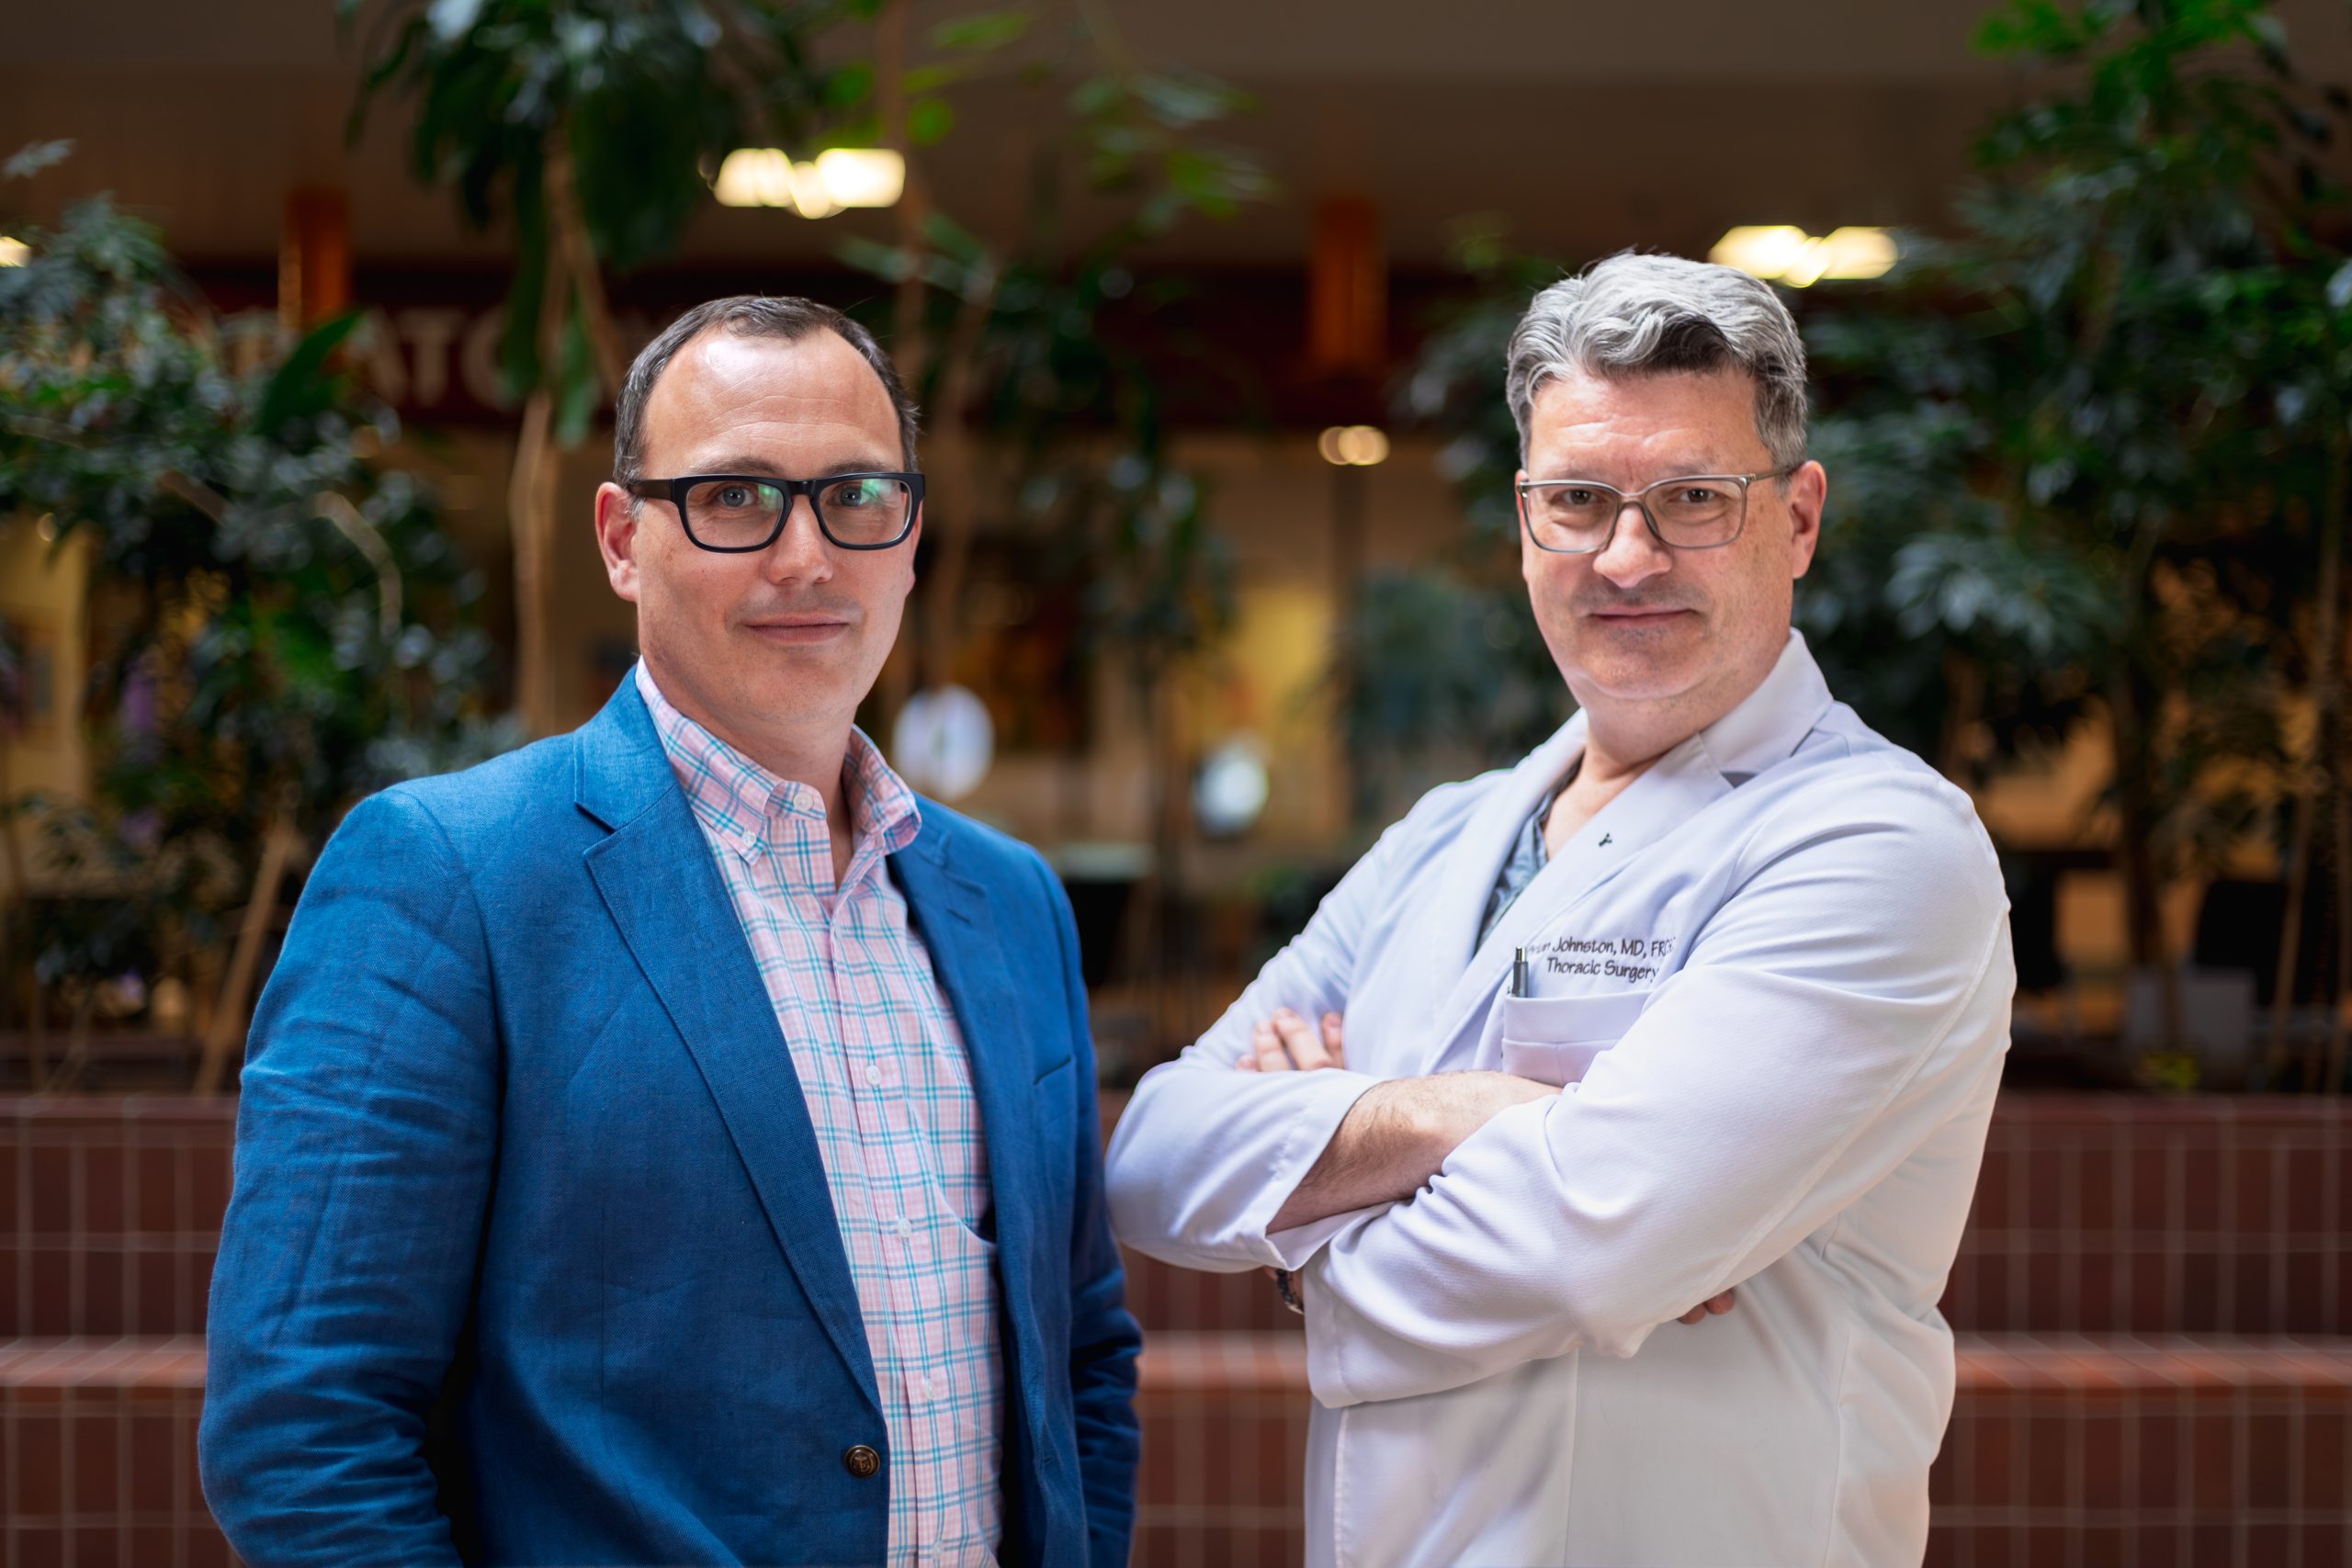 Dr. Johnston and Dr. Russell were part of the Team who pitched for leading-edge diagnostic equipment for earlier detection and treatment.